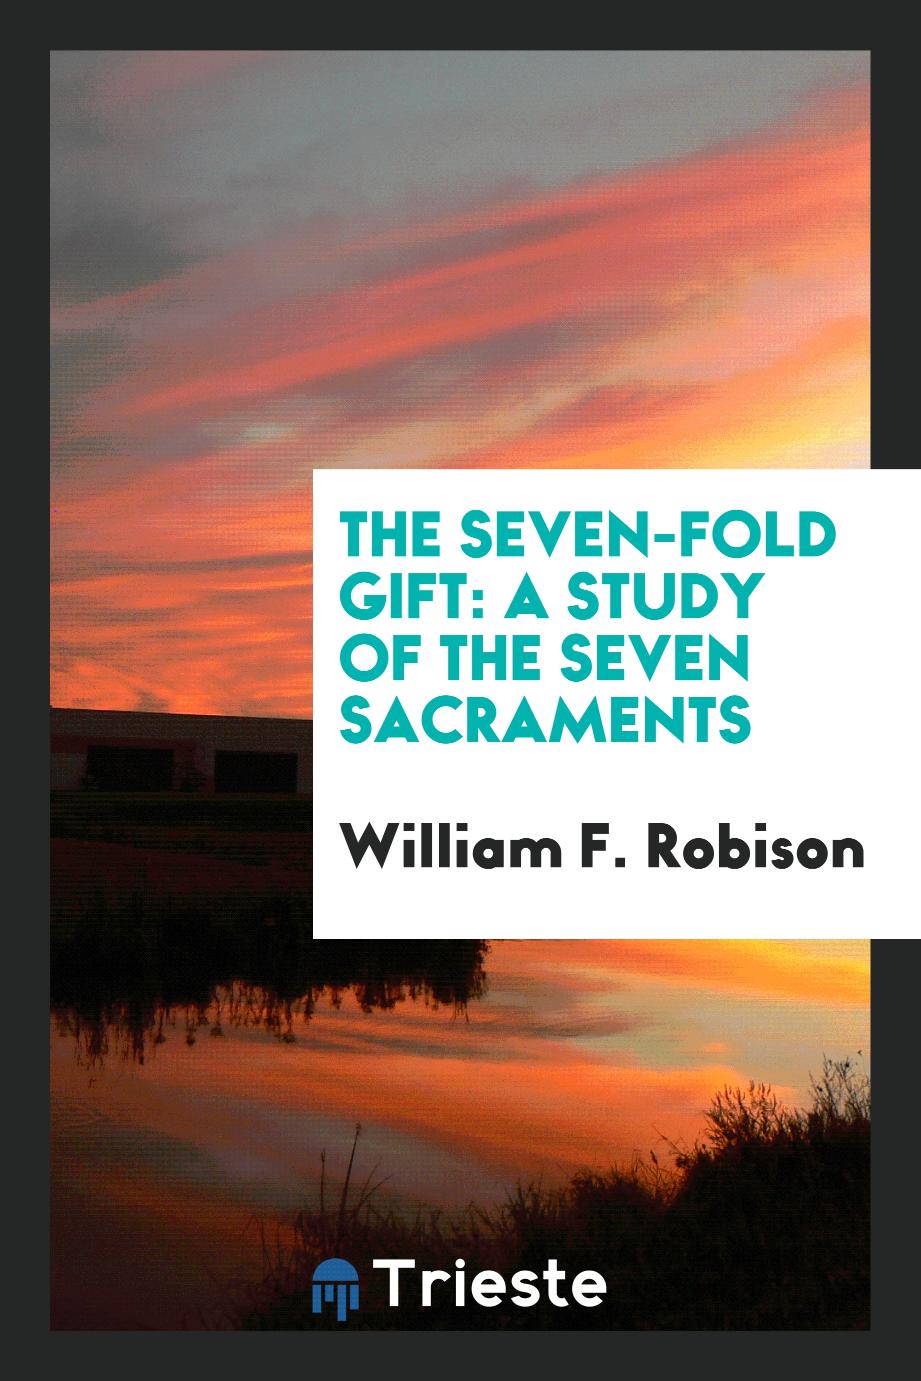 The seven-fold gift: a study of the seven sacraments